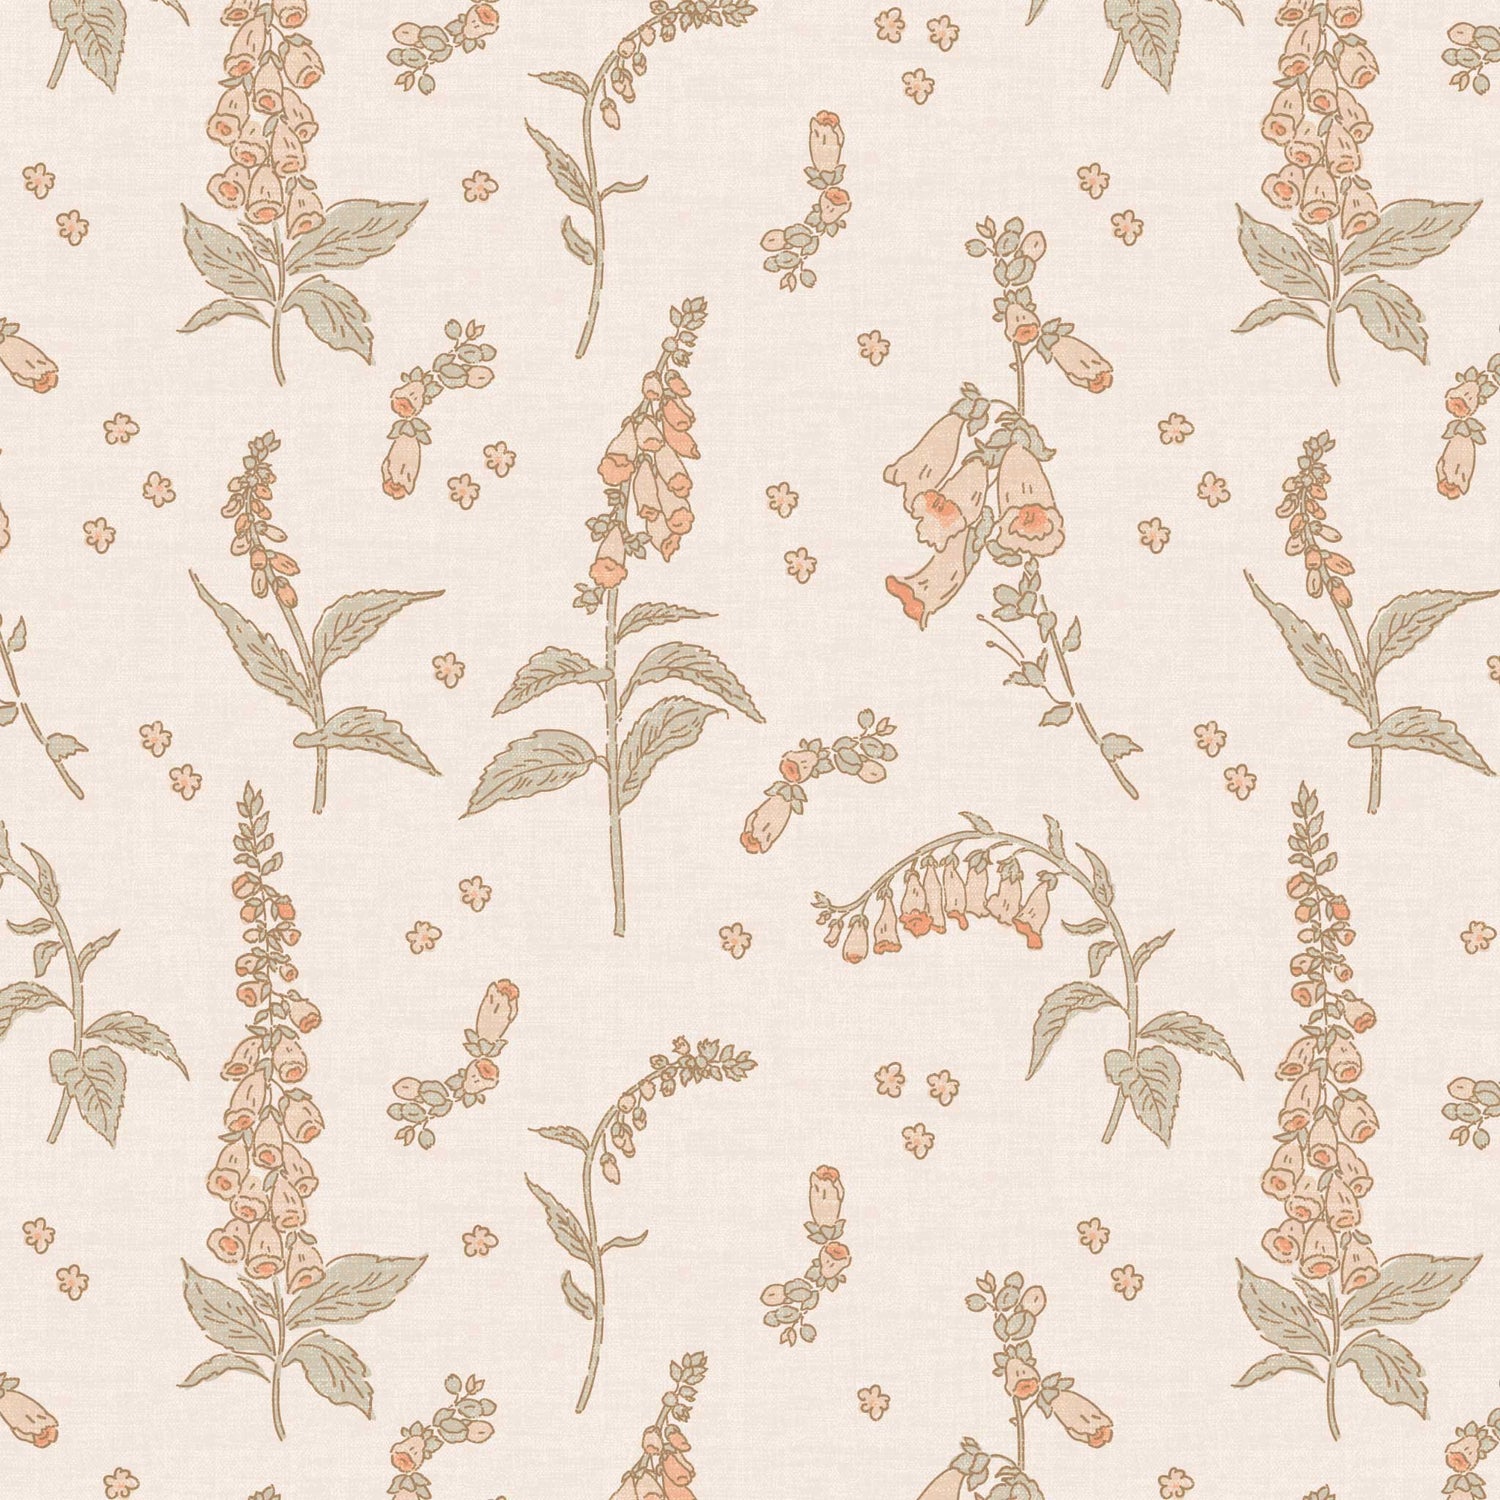 Enliven the spirit of any space with this gorgeous Foxgloves Wallpaper - Pink! Its delicate botanical design will bring a touch of feminine charm & character to your walls. Perfect for a nursery or a delicate space.